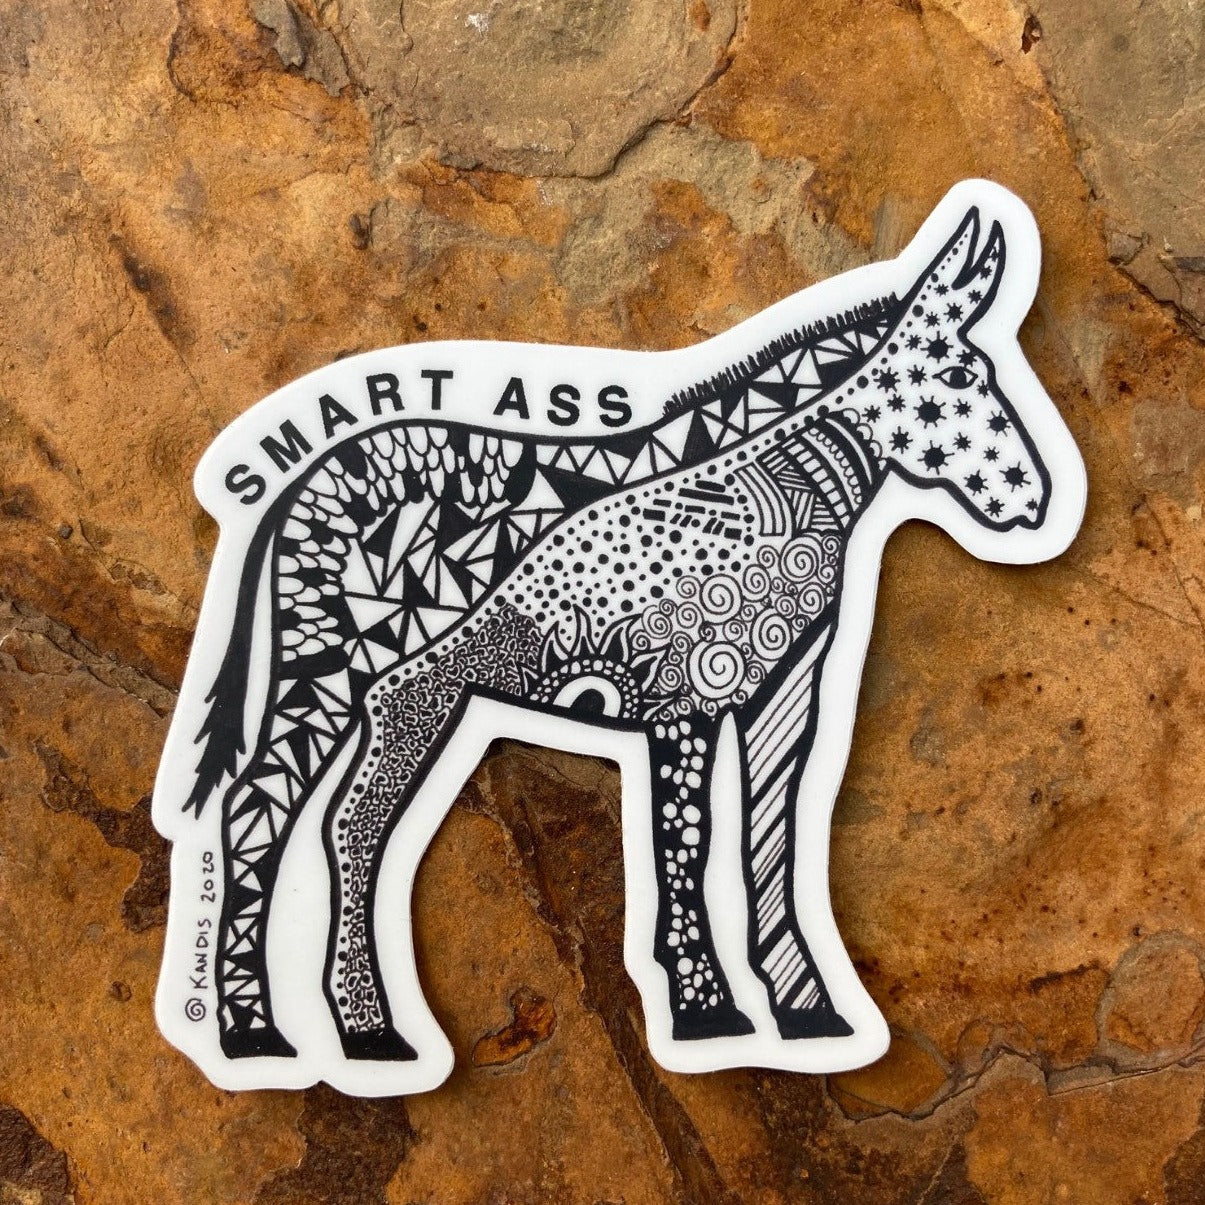 Smart Ass  -Pack of 10 (Wholesale Price)